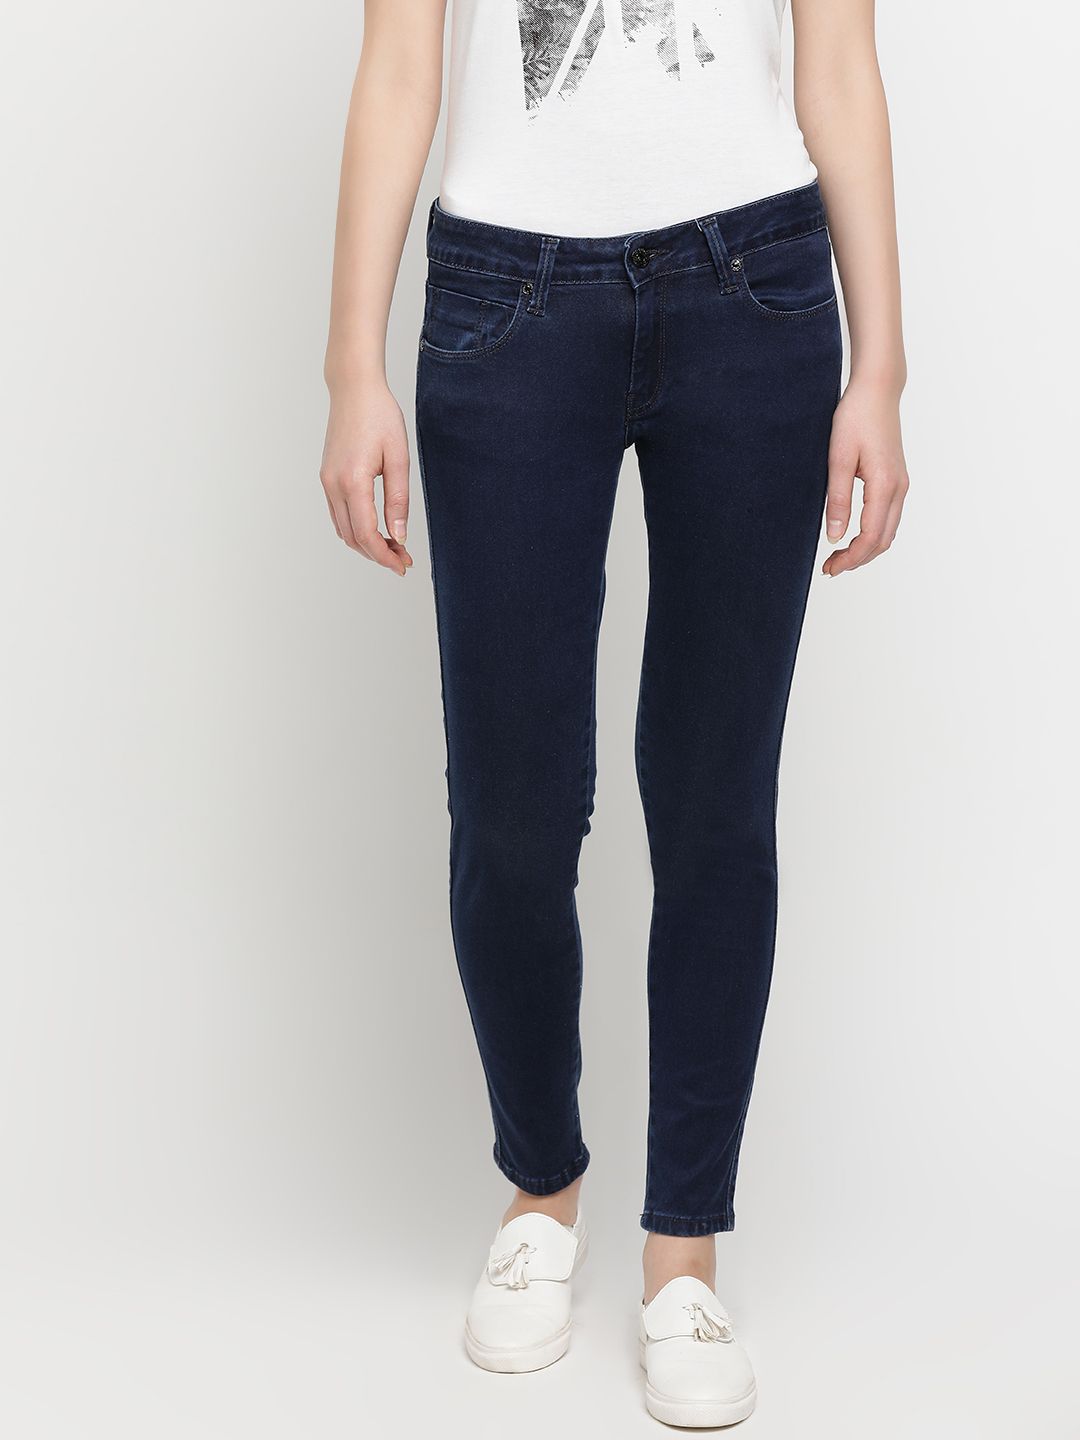 Pepe Jeans Women Navy Blue Slim Fit Mid-Rise Clean Look Stretchable Jeans Price in India